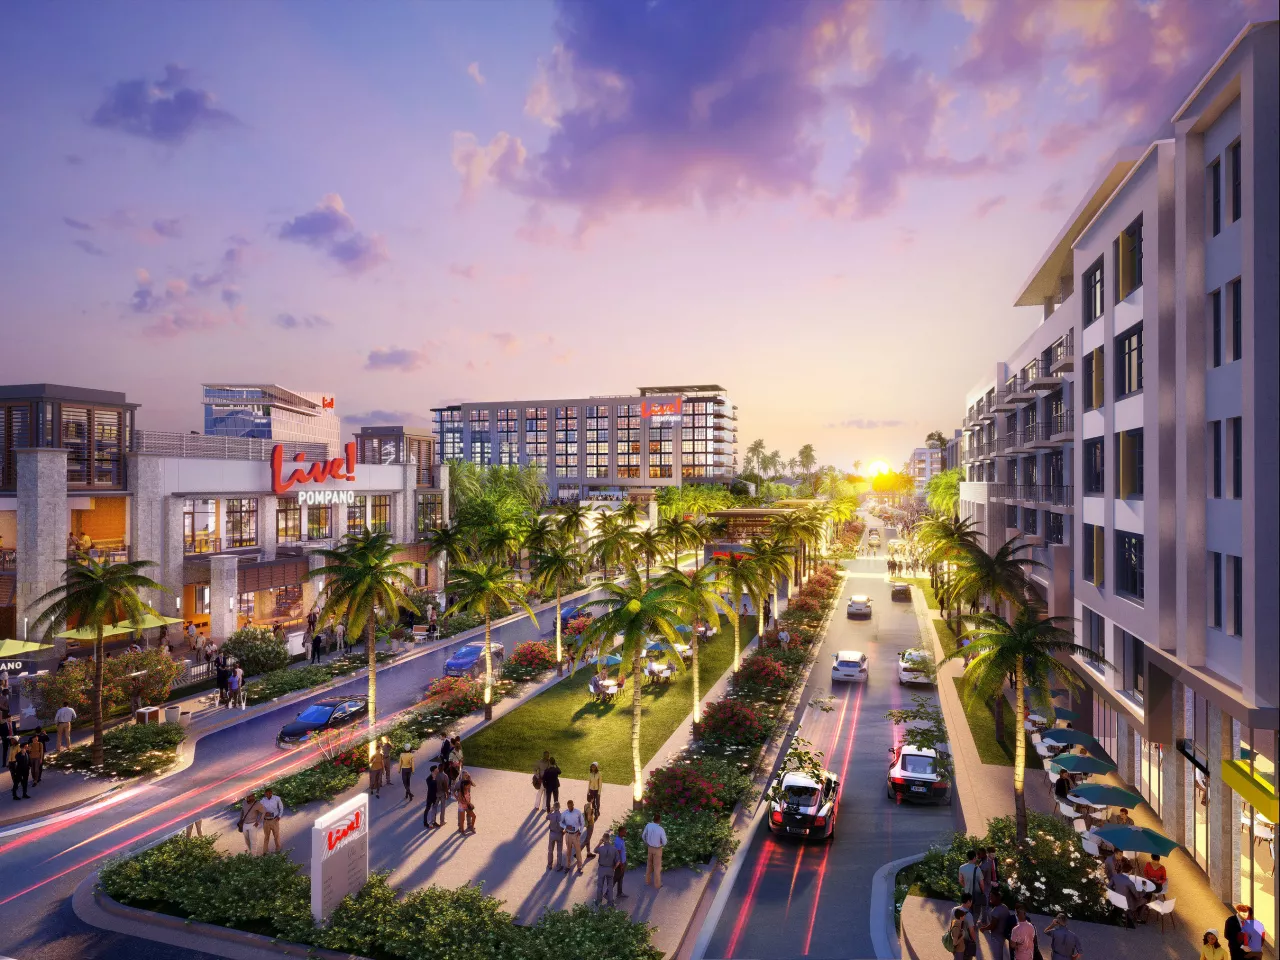 THE CORDISH COMPANIES AND CAESARS ENTERTAINMENT UNVEIL DETAILS FOR MAJOR POMPANO BEACH MIXED-USE DEVELOPMENT - THE POMP